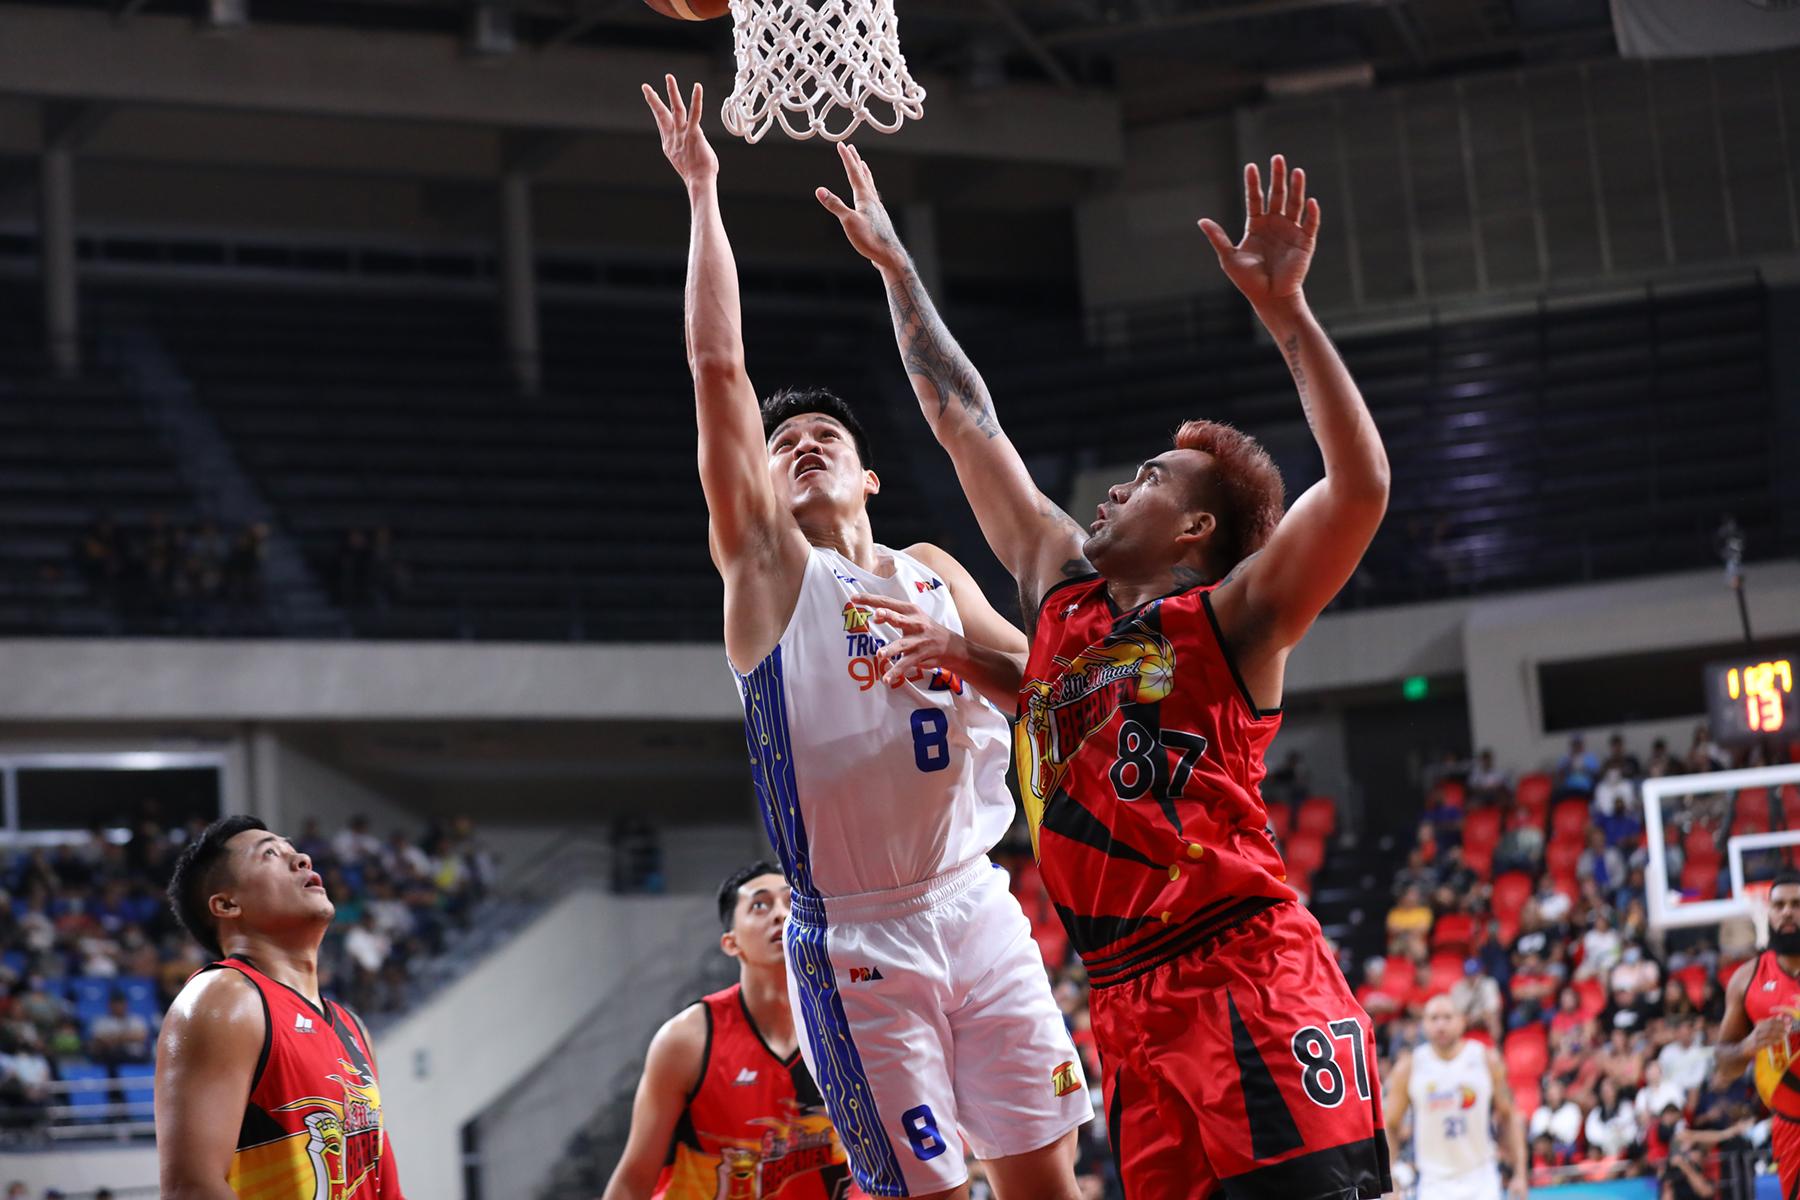 San Miguel with a come from behind win in Game 4 to stay alive